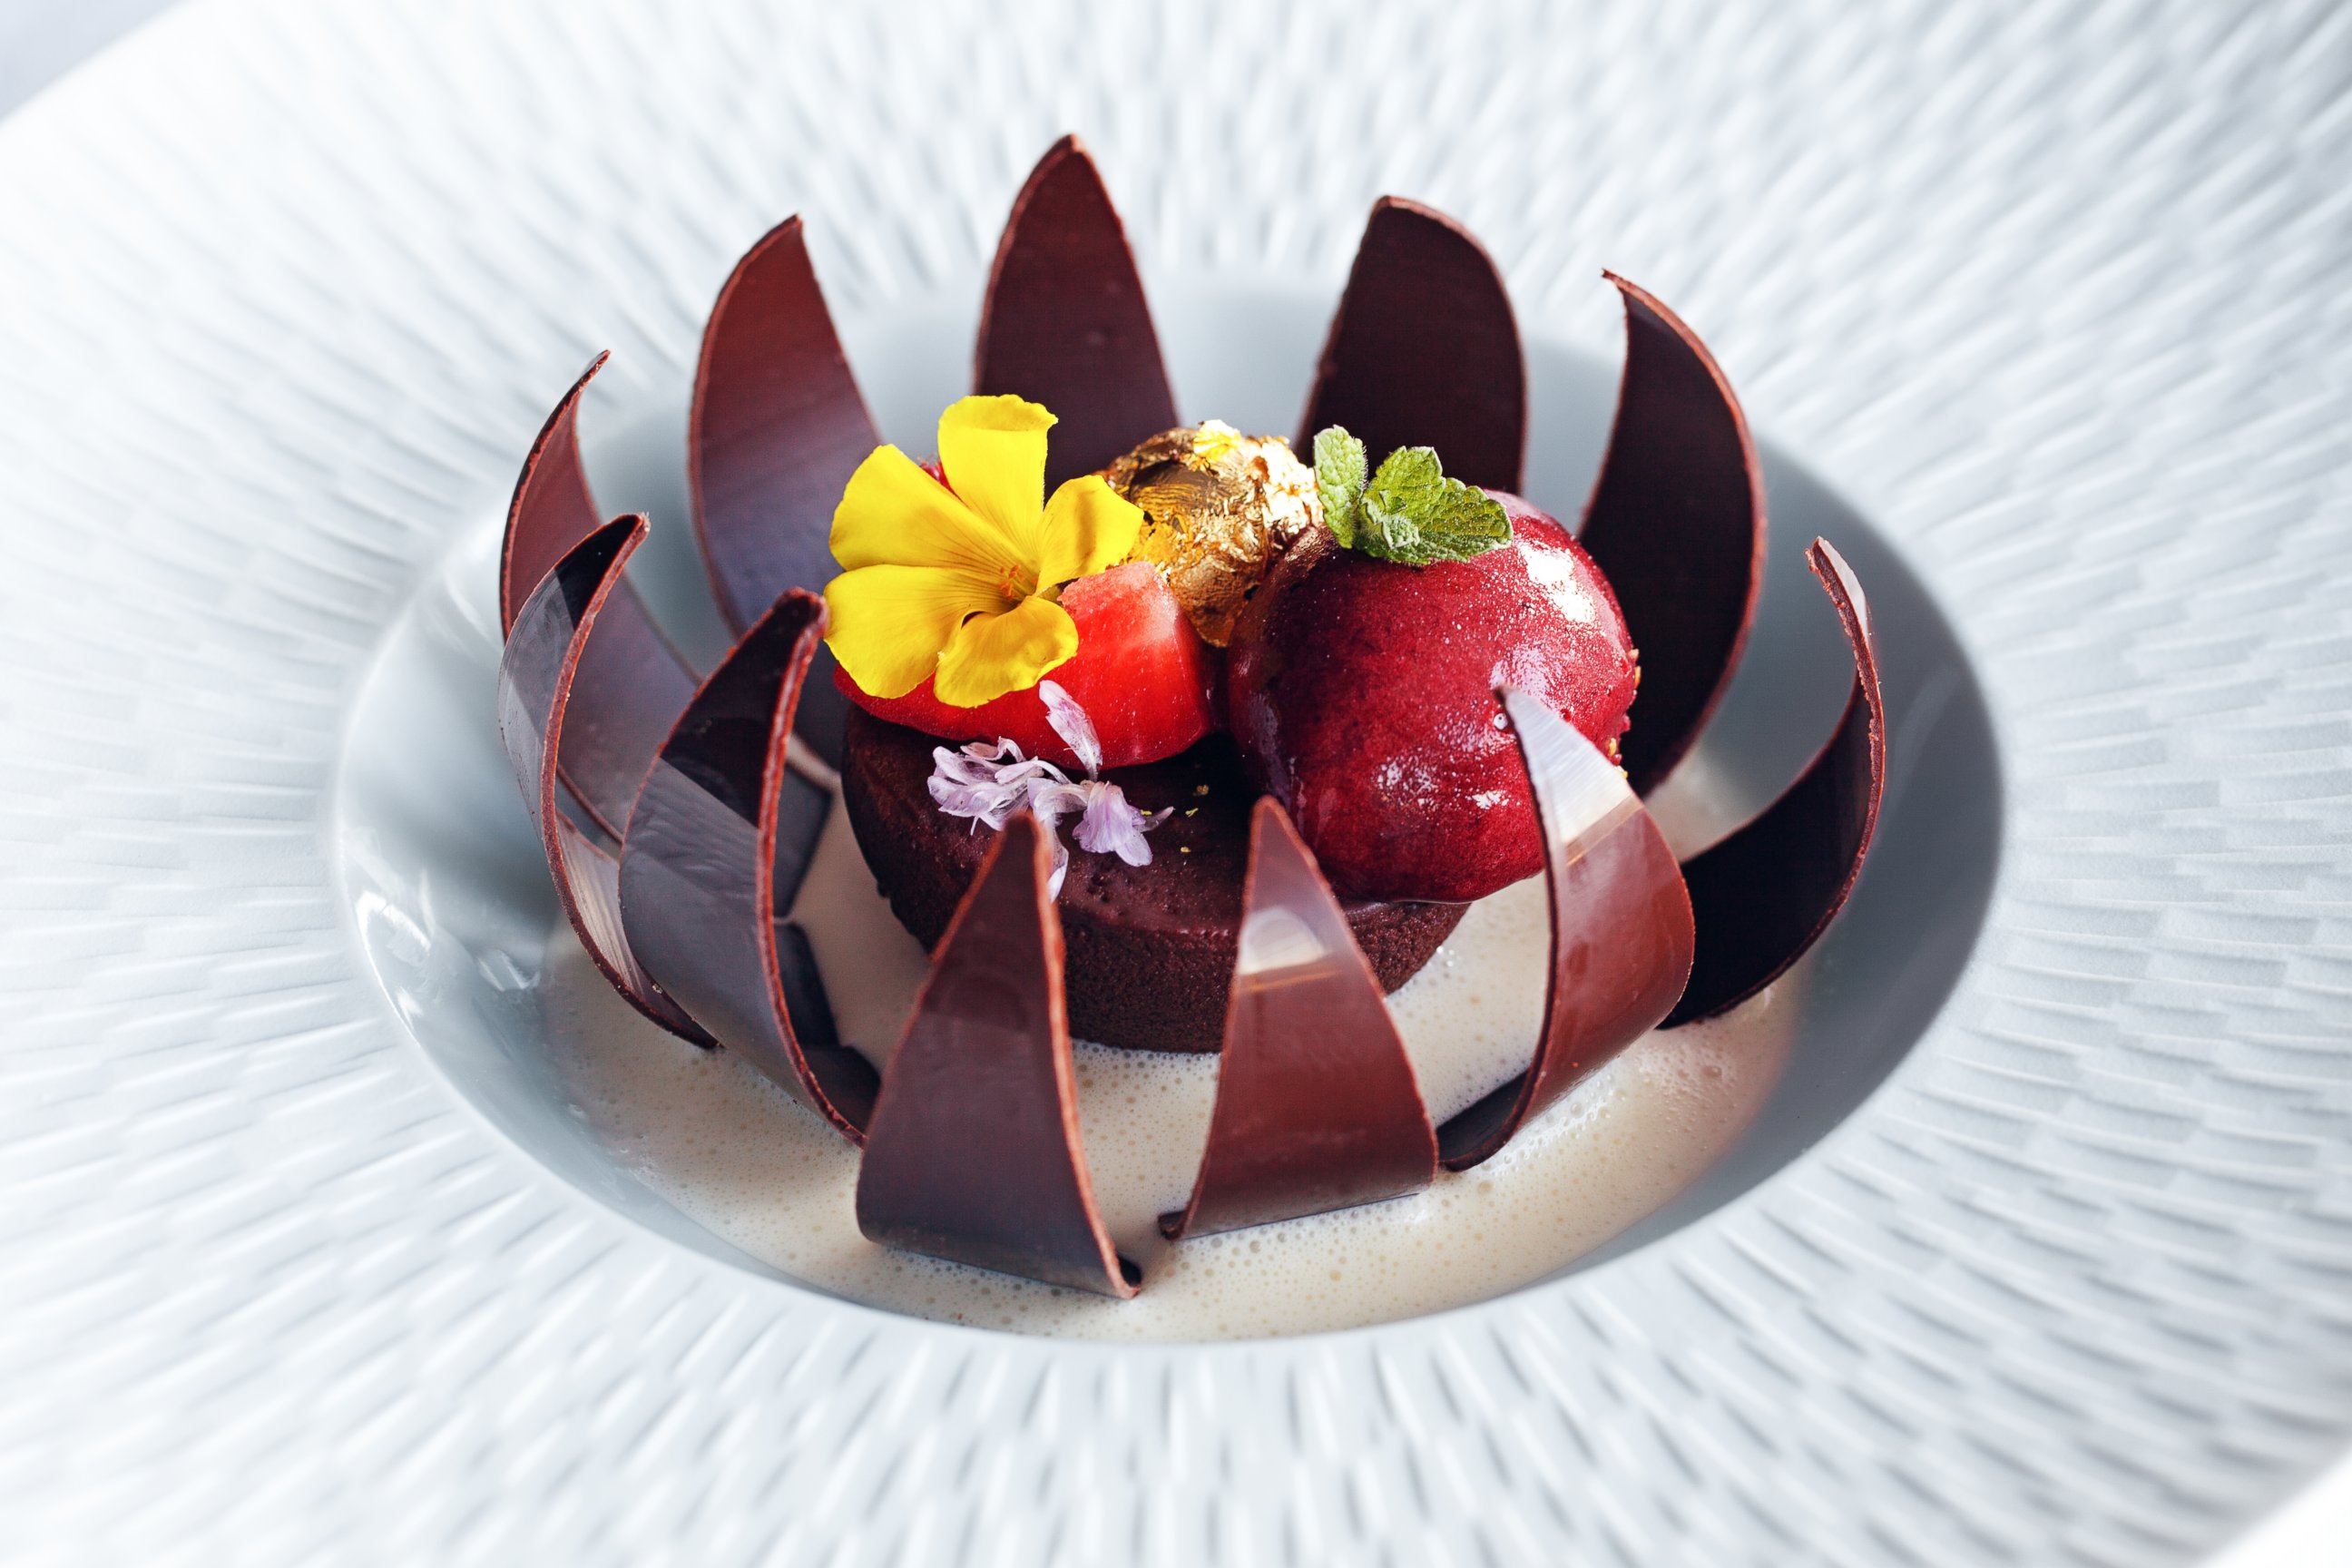 PHOTO: The chocolate flower dessert, as it opens.